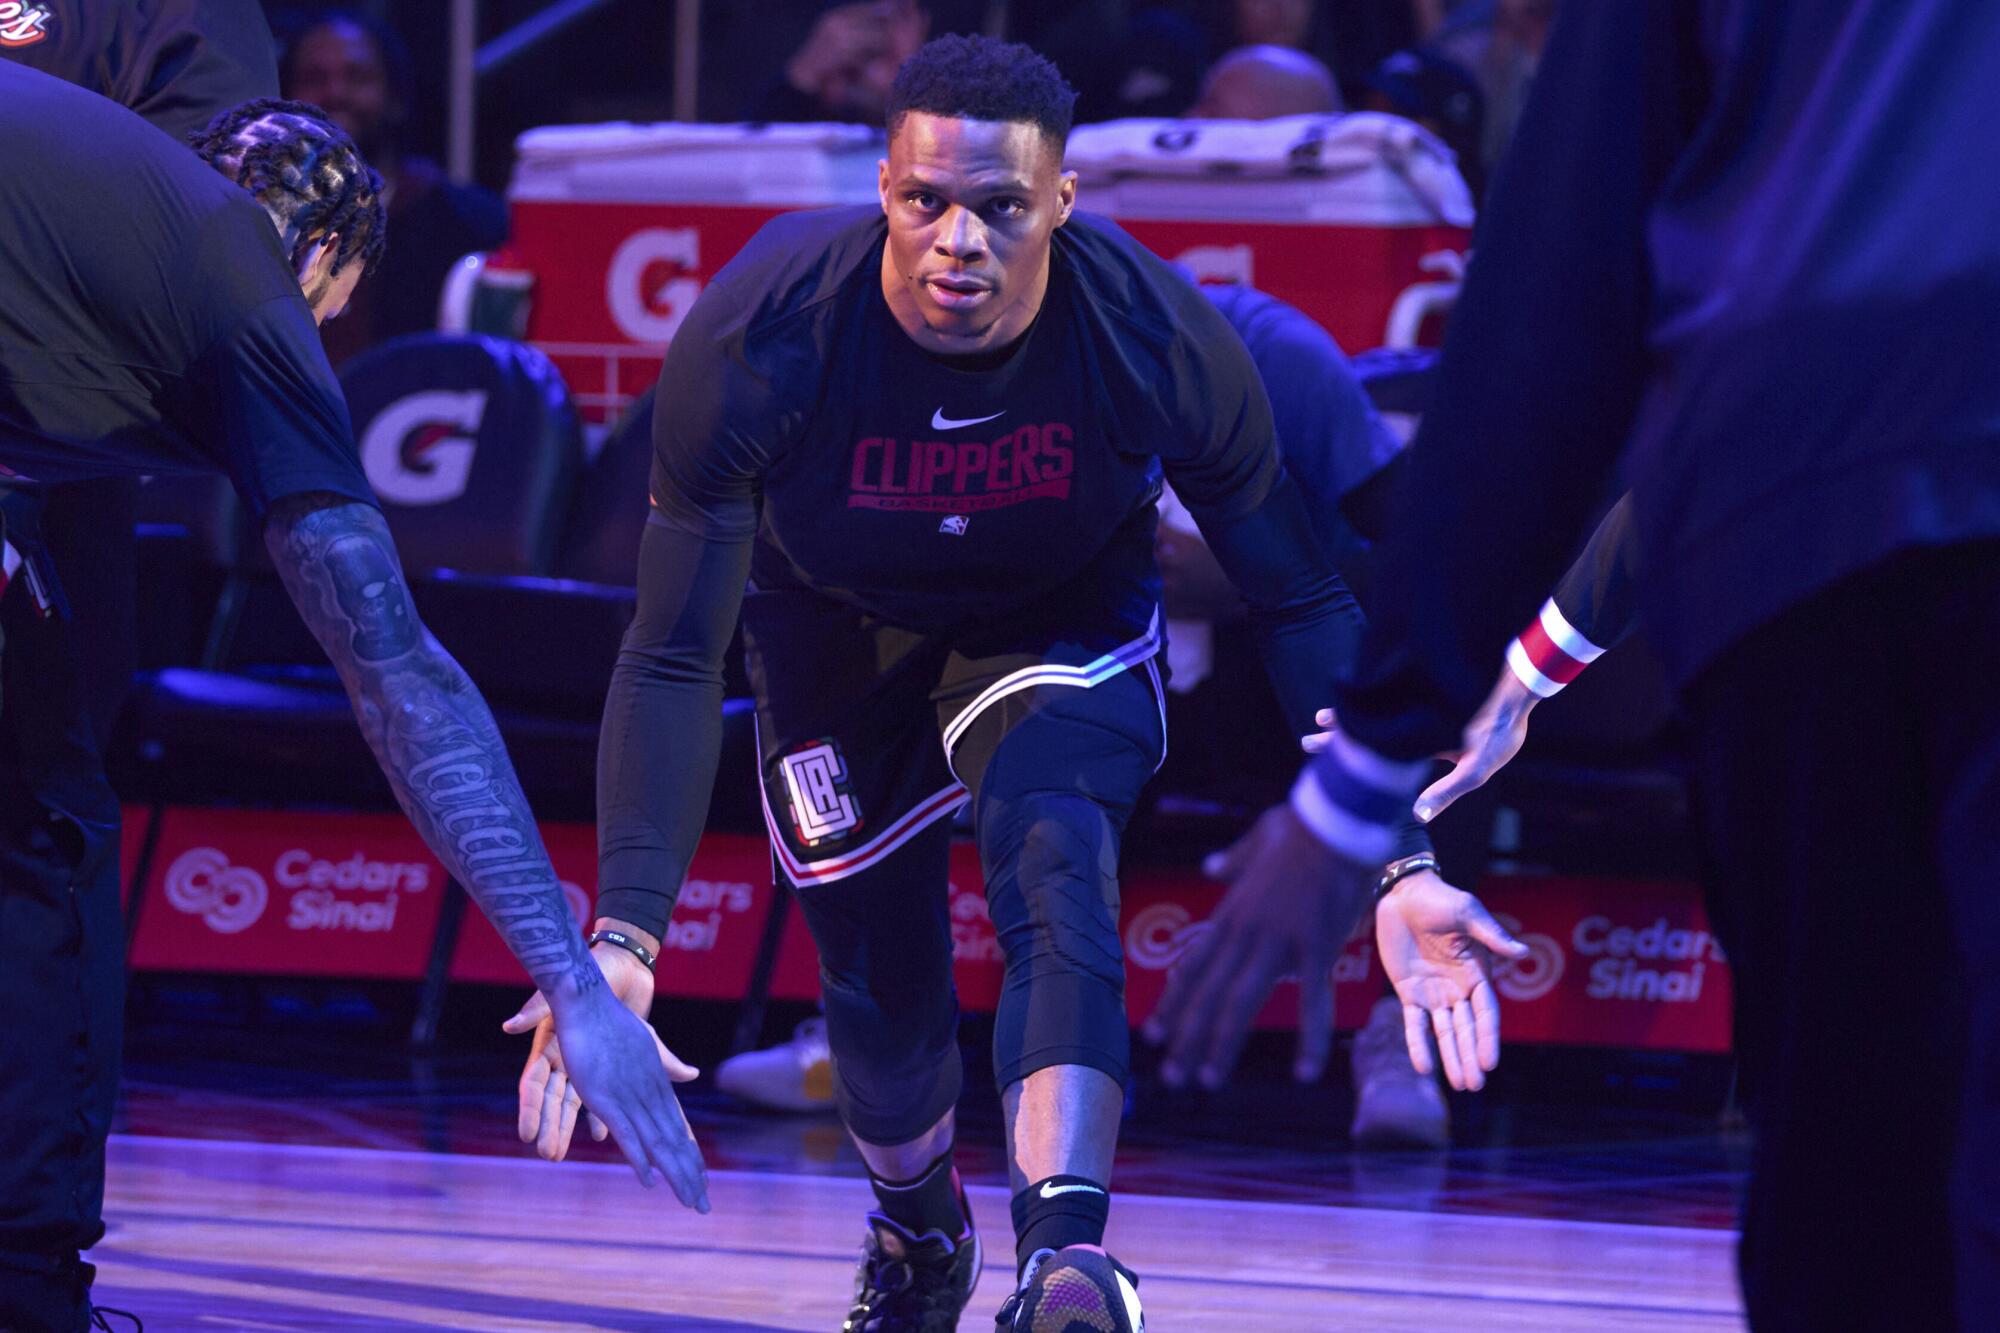 Clippers point guard Russell Westbrook slaps hands with teammates as he takes the court during player introductions.